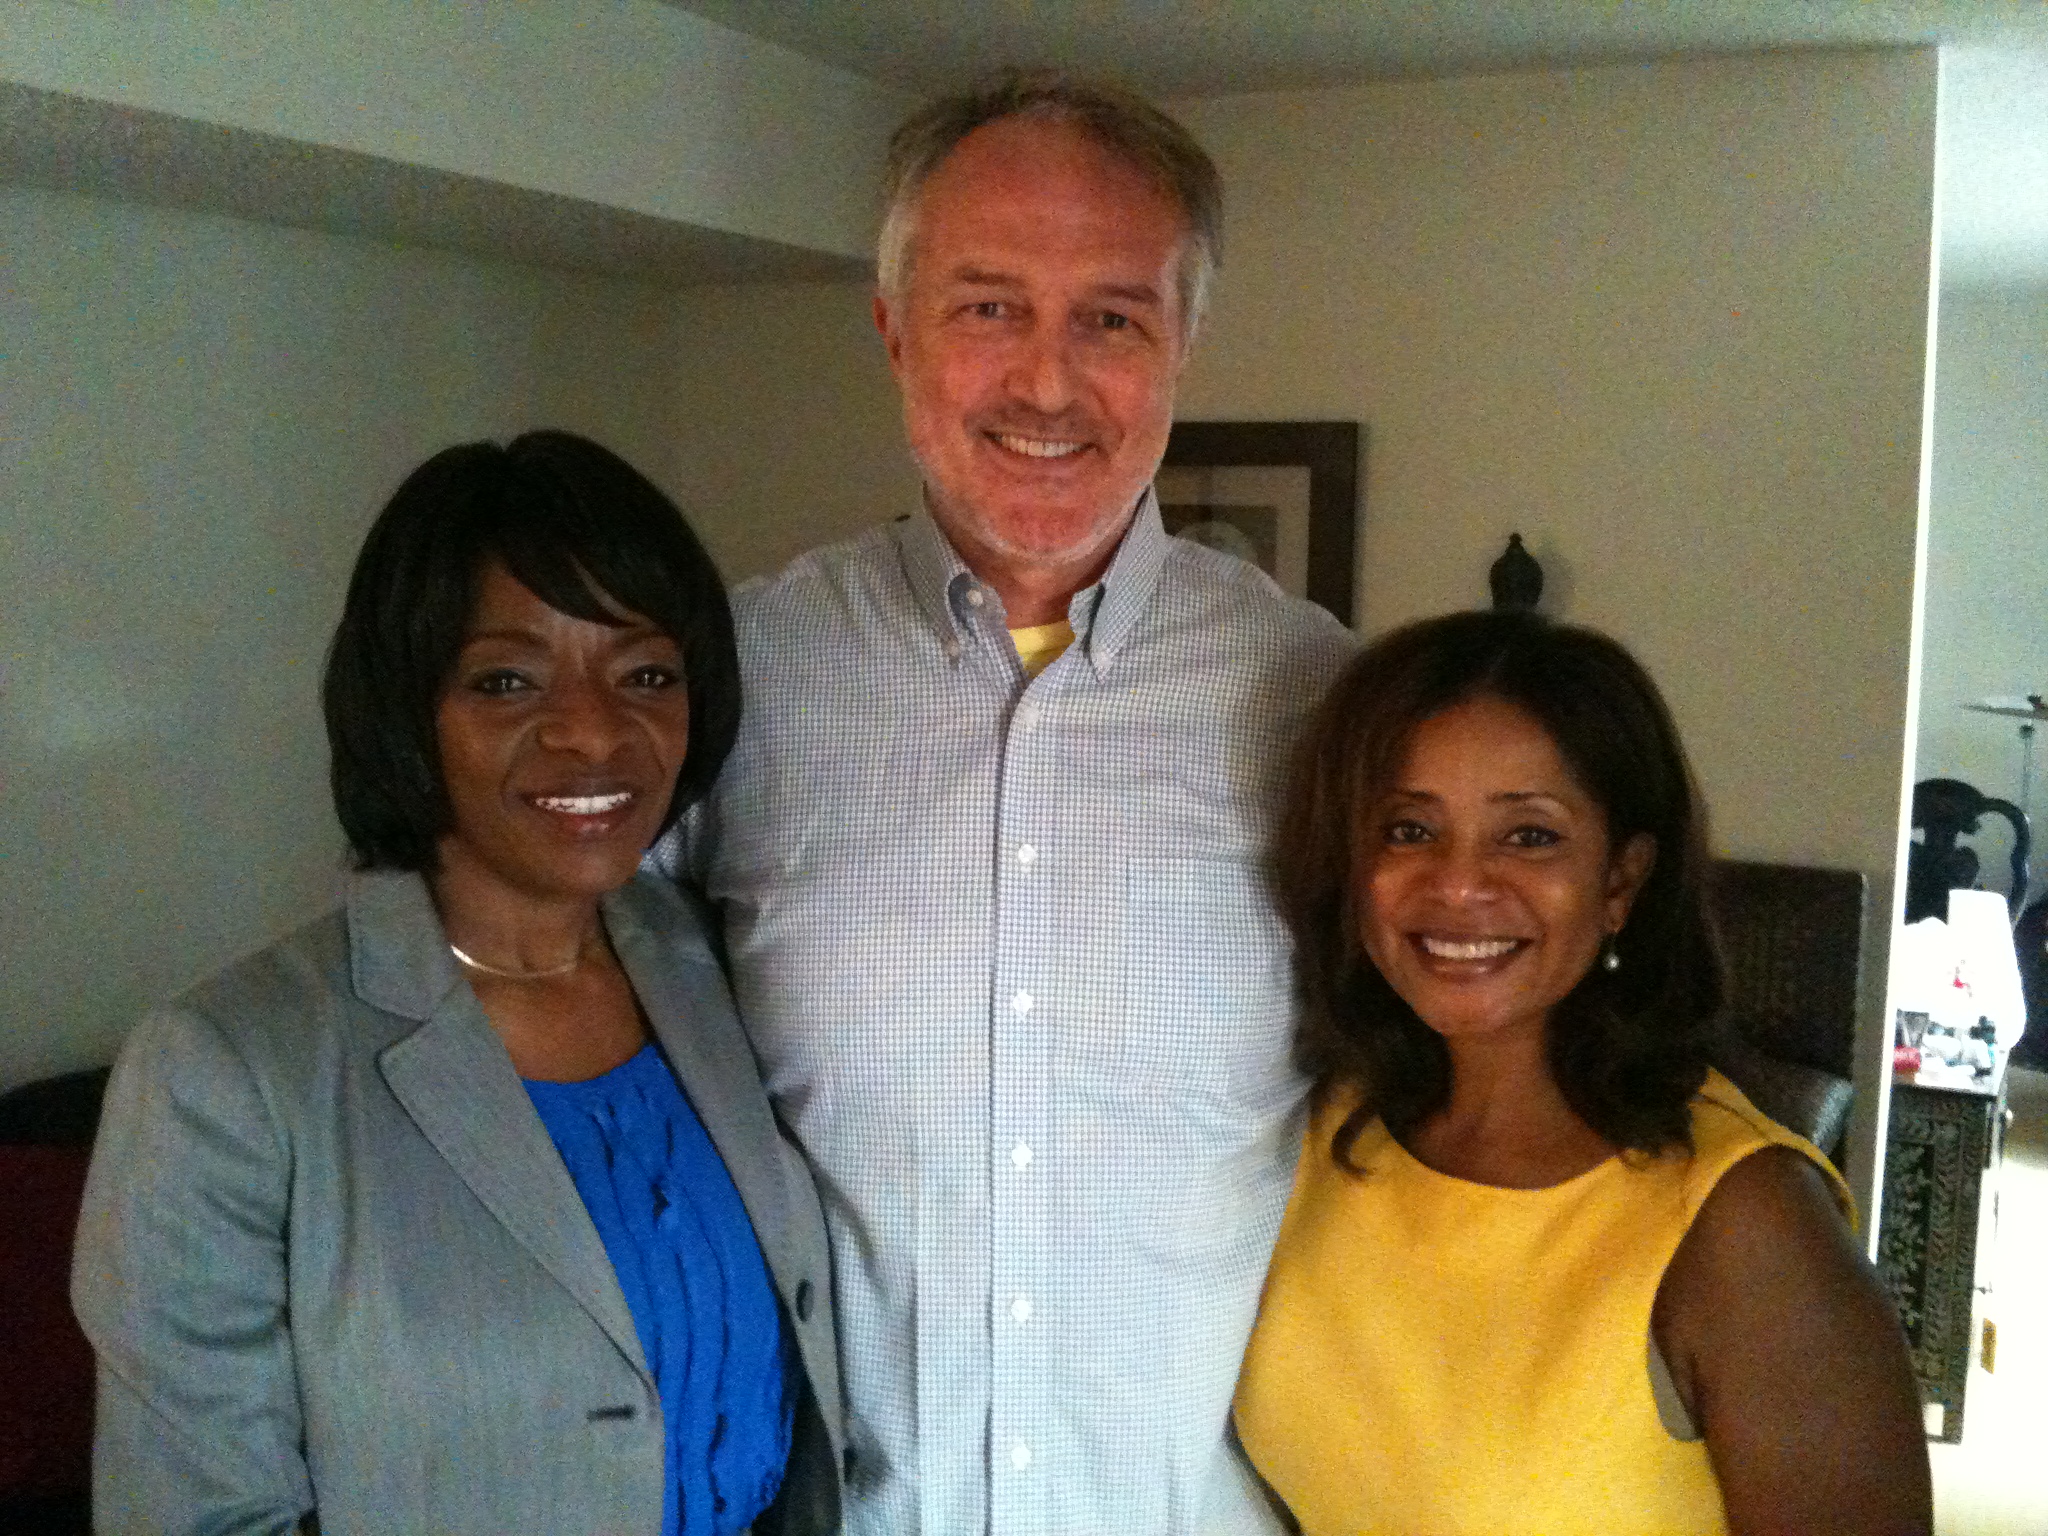 NBC4 LA's Beverly White, Dar Dixon & Donzaleigh Abernathy. Interview - 50th Anniversary of The March on Washington. Aug. 2013